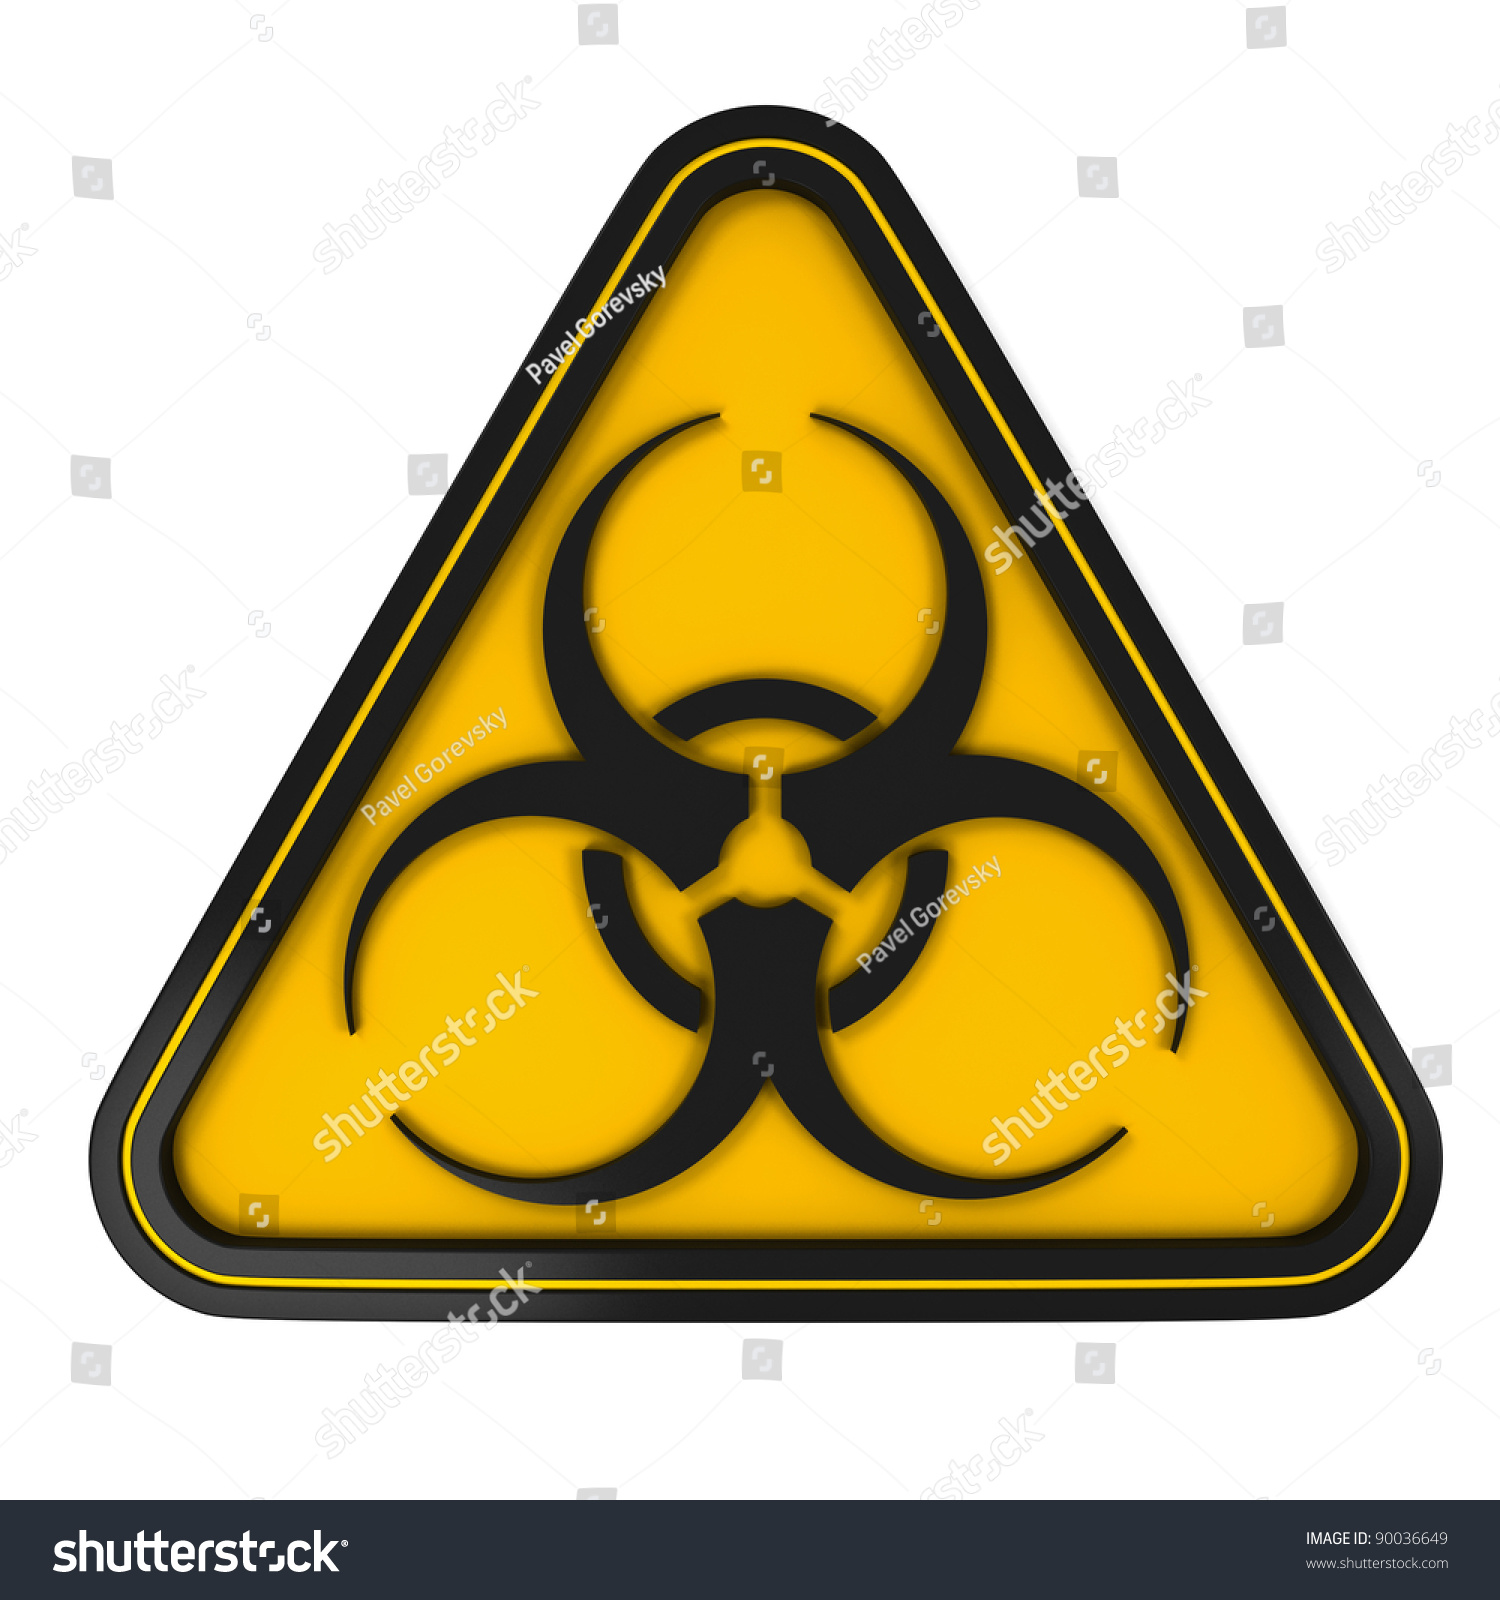 Black Biohazard Triangle Sign On Yellow With White Background Stock ...